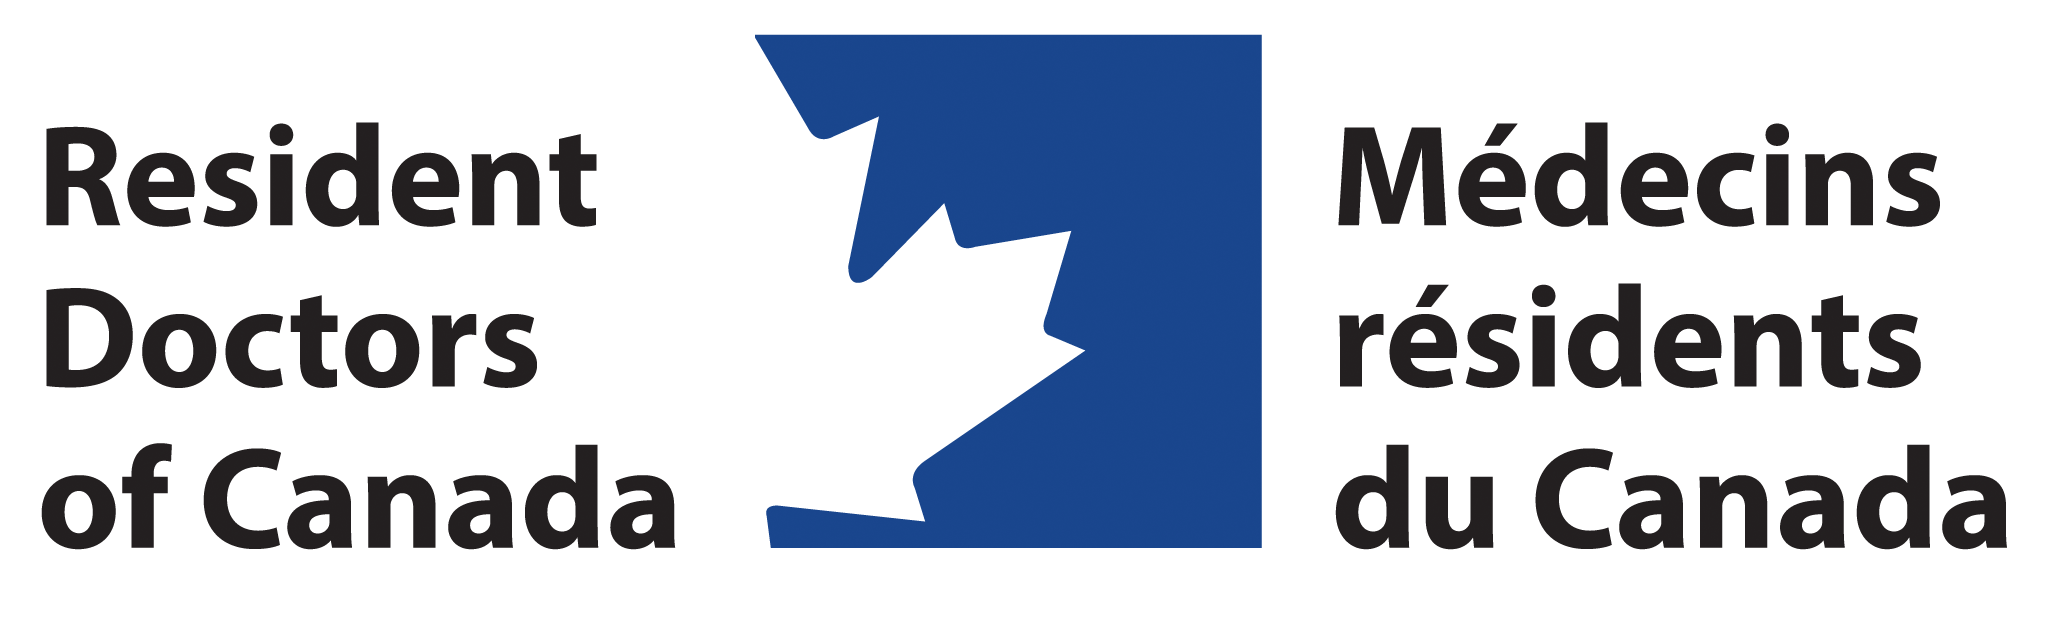 Resident Doctors of Canada Logo